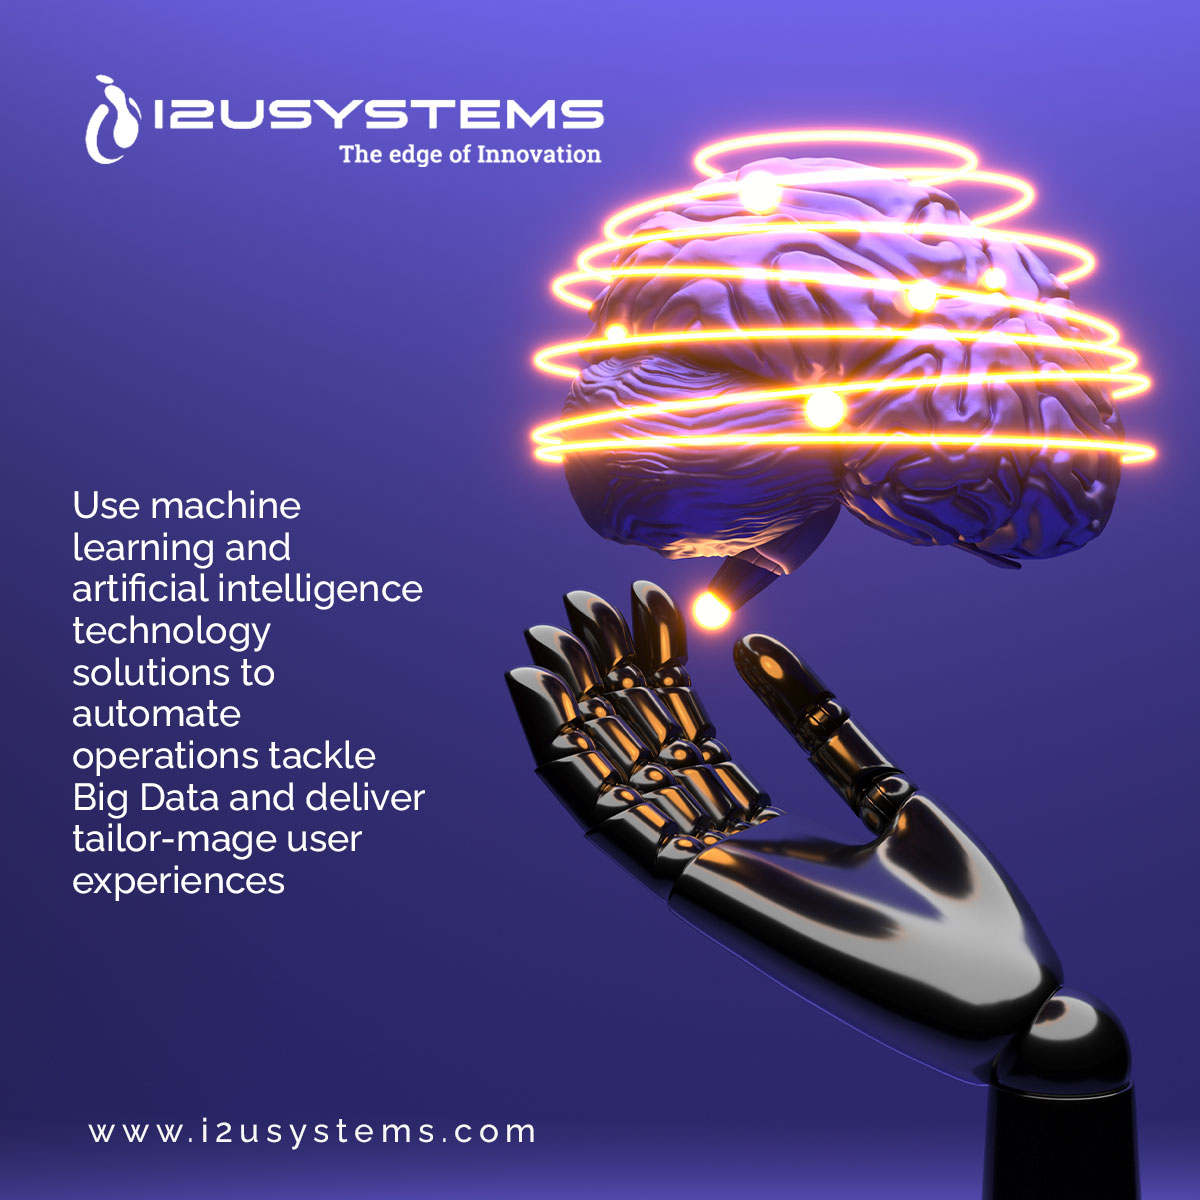 Use machine learning and artificial intelligence technology solutions to automate operations tackle Big Data and deliver tailor-mage user experiences #i2usystems #c2crequirements #w2jobs #directclient #IOT #artificial #intelligence #technology #operation #tackle #deliver